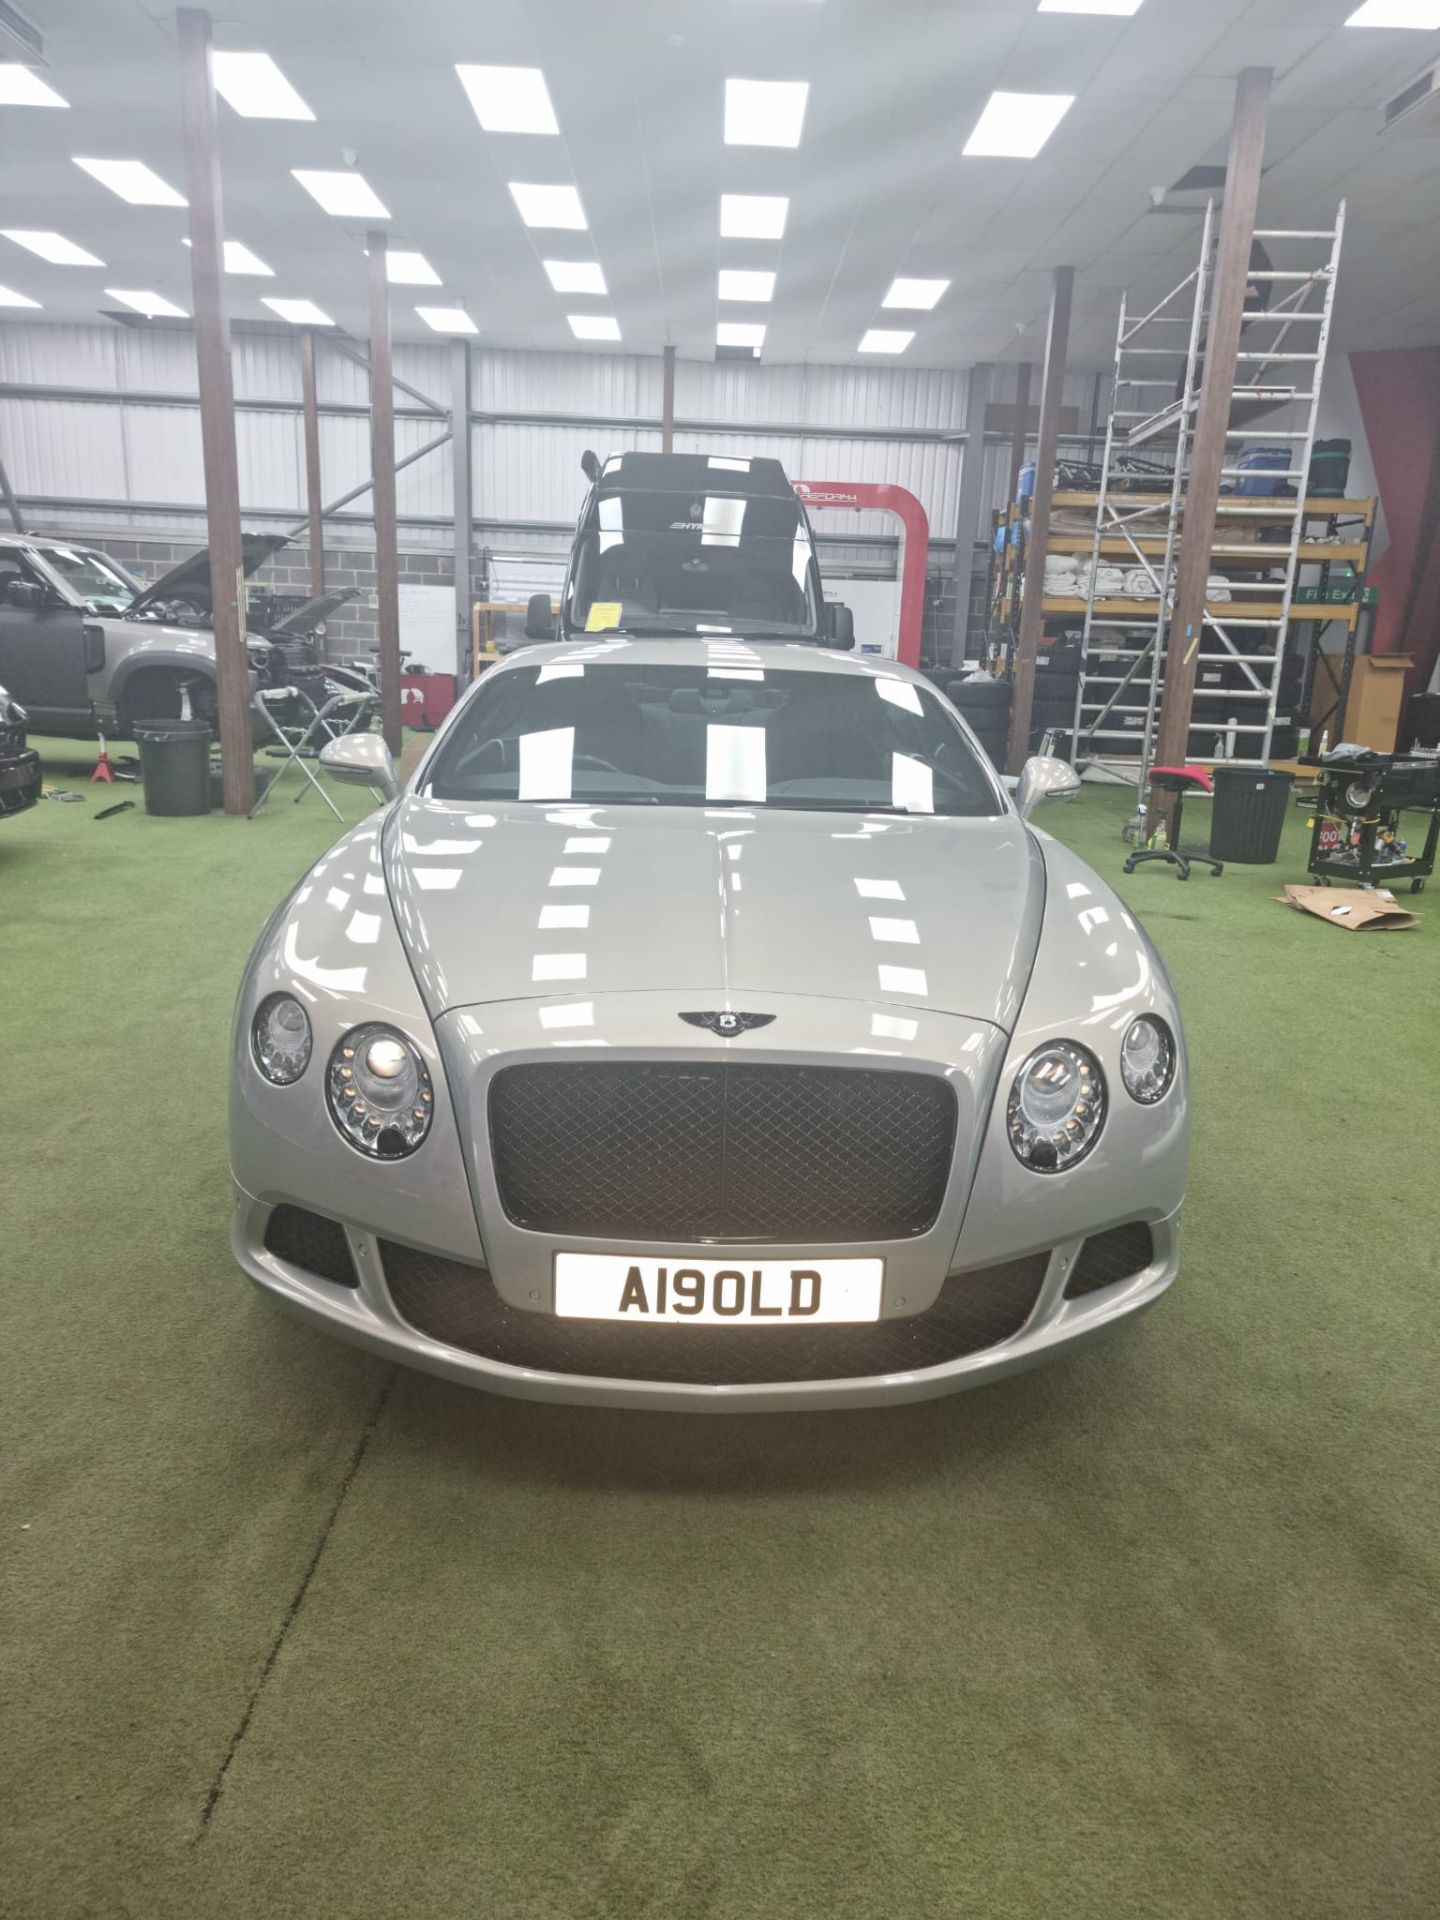 2013 BENTLEY CONTINENTAL GT SPEED AUTO GREY COUPE, 56k miles, 626 BHP, 5998 cc PETROL - Image 5 of 16